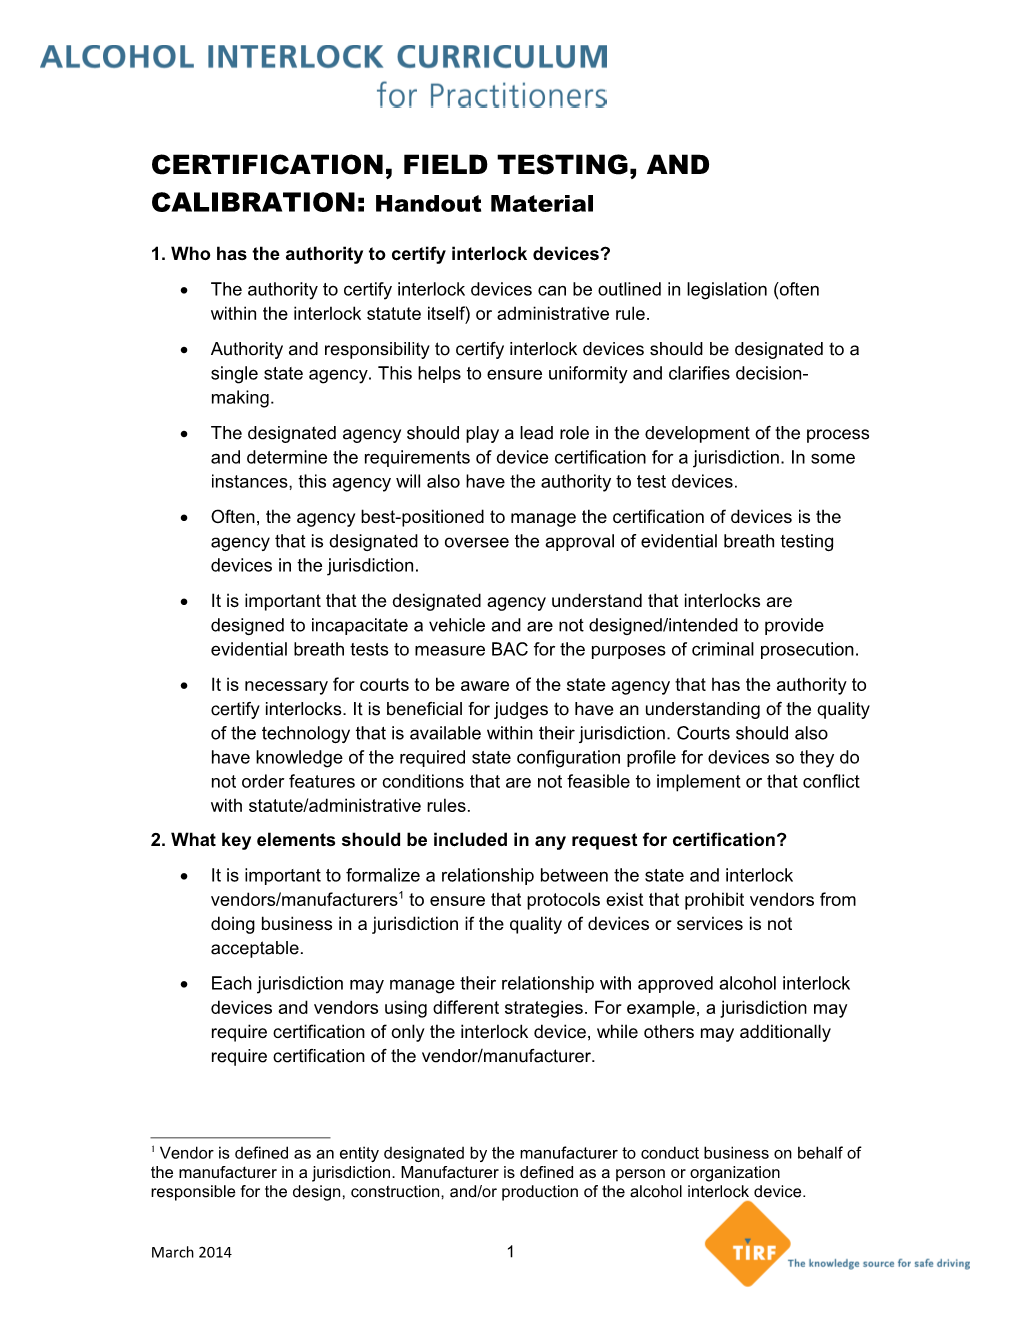 CERTIFICATION, FIELD TESTING, and CALIBRATION: Handout Material